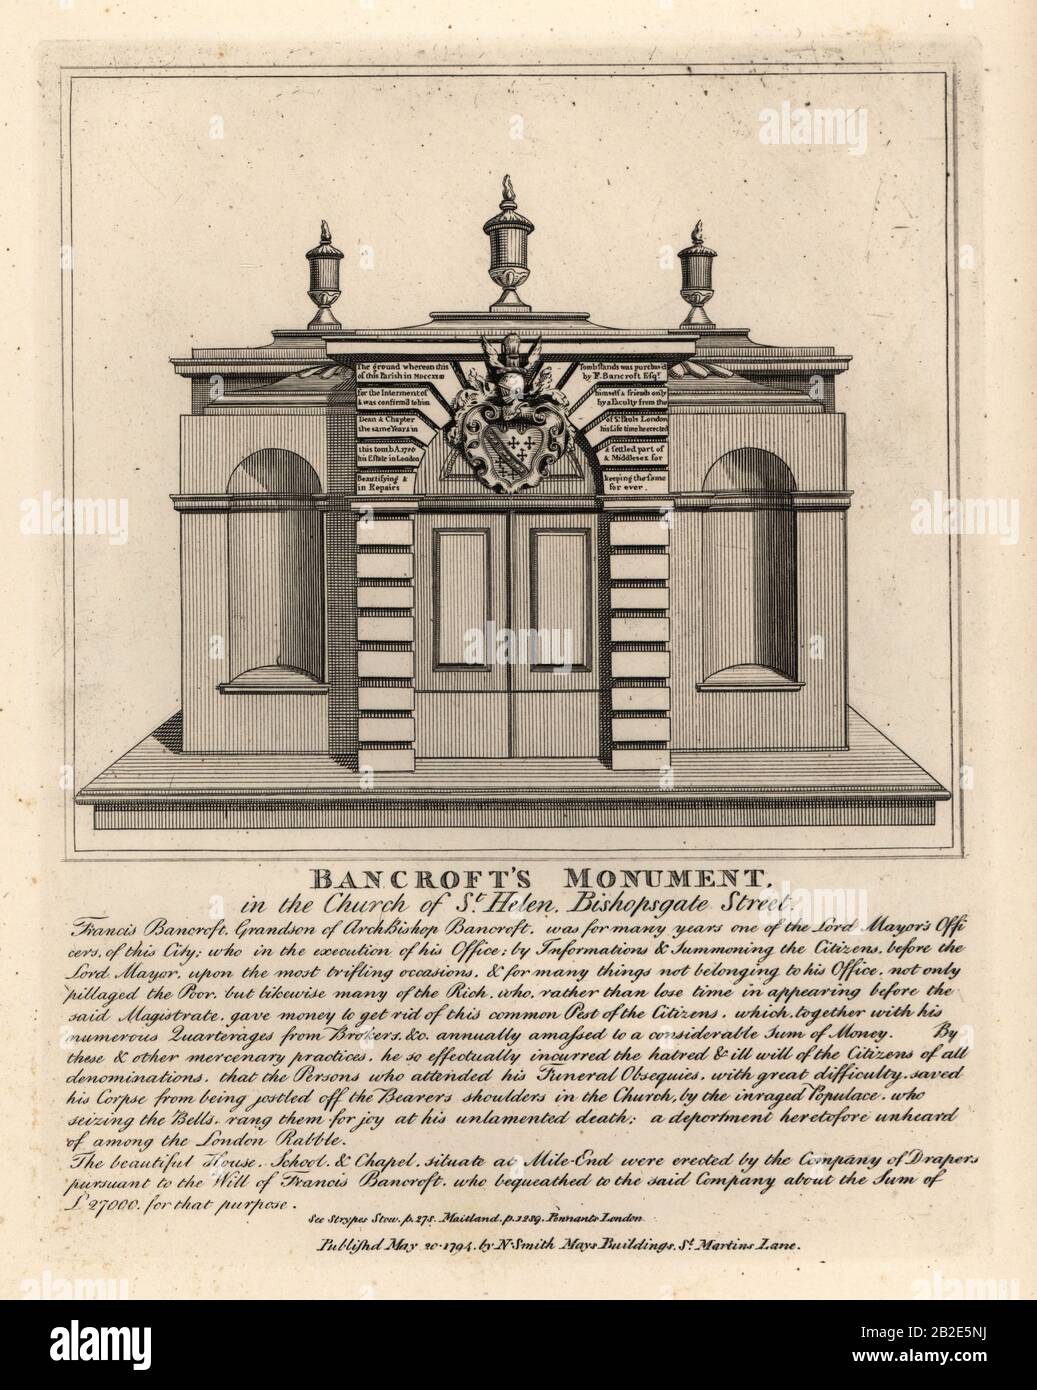 Monument of Thomas Bancroft, Lord Mayor’s Officer, in the church of St. Helen, Bishopsgate Street. Copperplate engraving by John Thomas Smith after original drawings by members of the Society of Antiquaries from his J.T. Smith’s Antiquities of London and its Environs, J. Sewell, R. Folder, J. Simco, London, 1794. Stock Photo